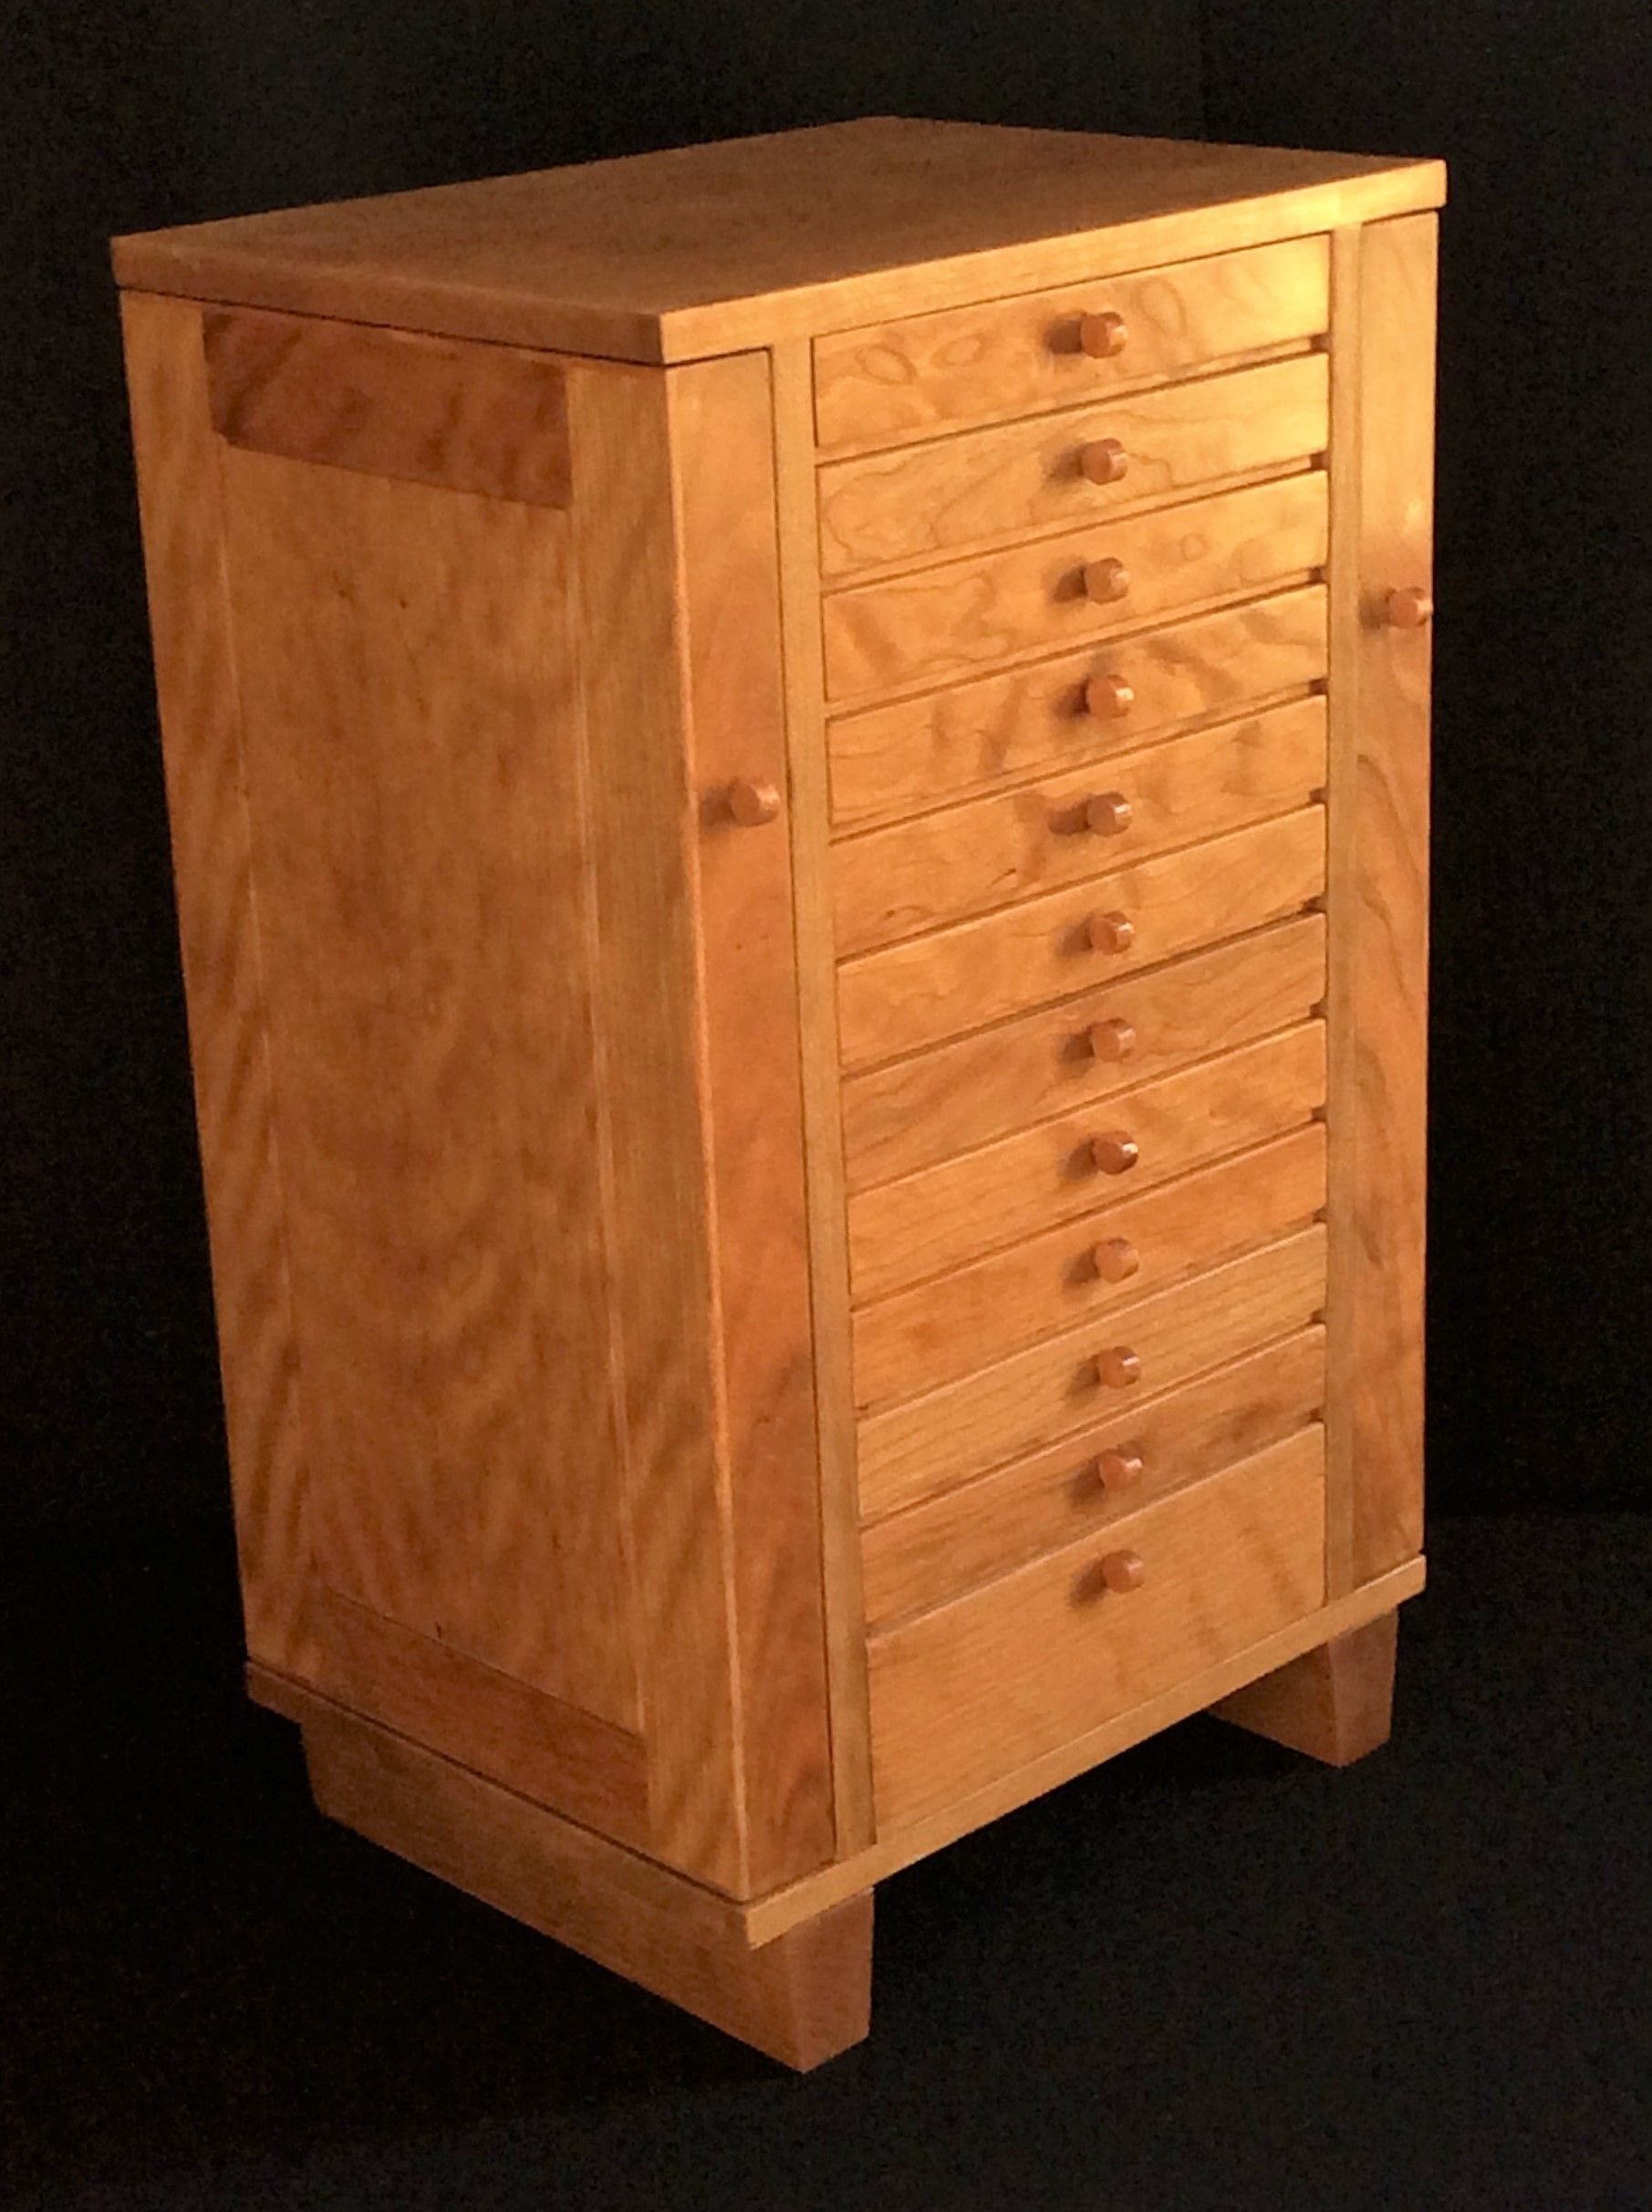 Solid Wood Computer Armoire